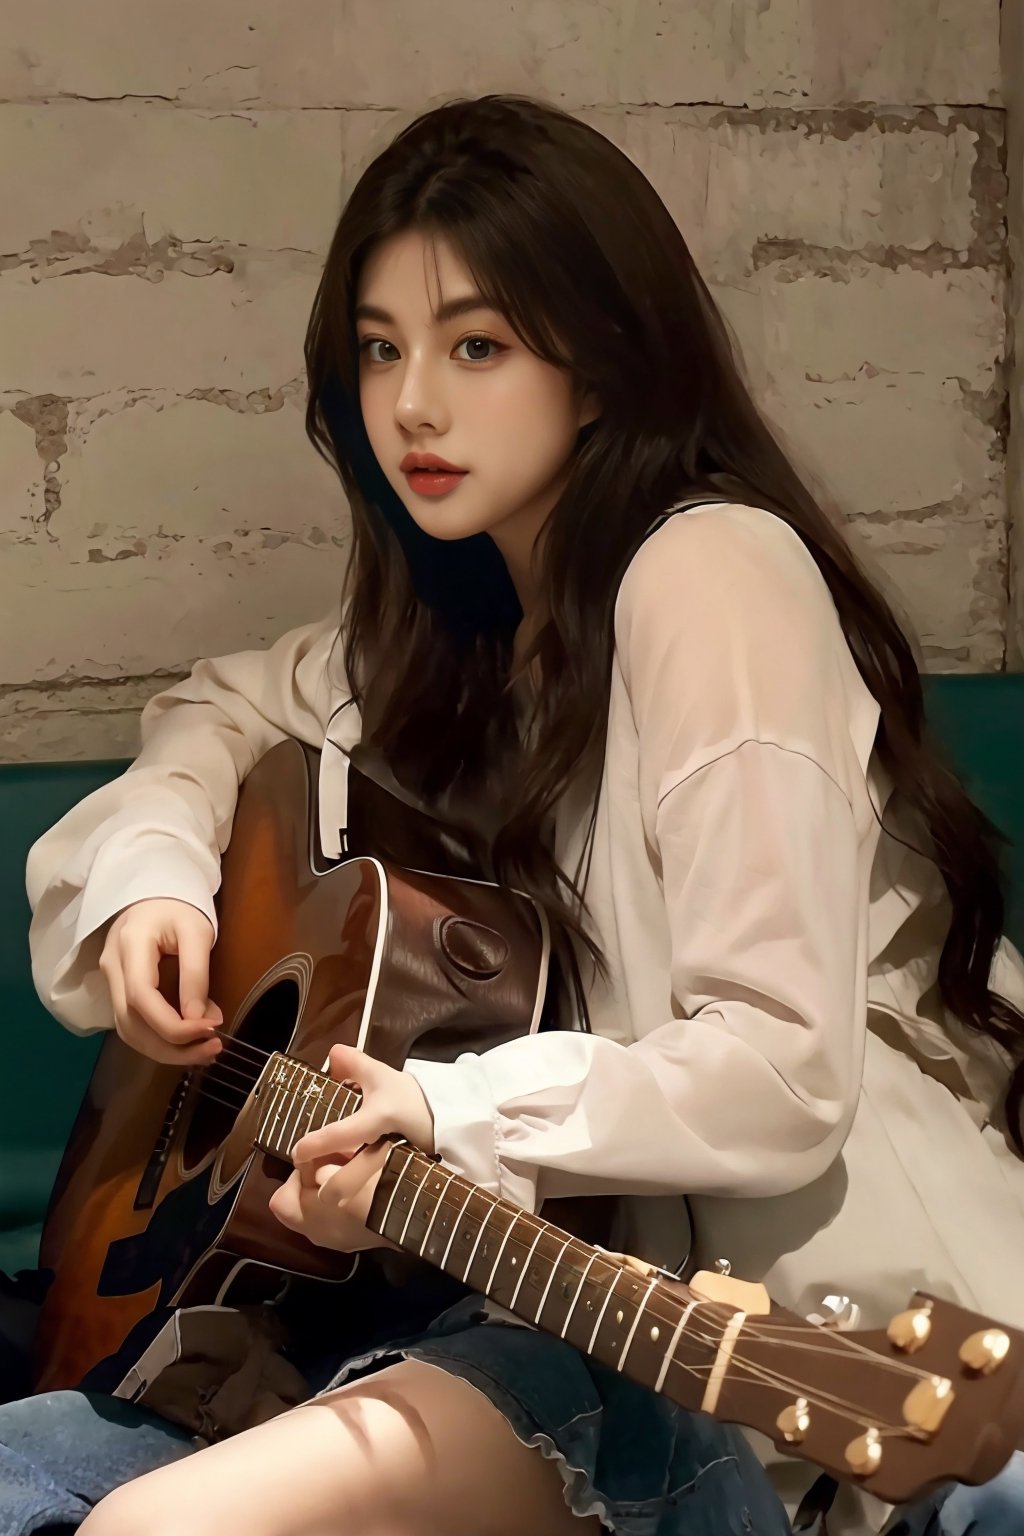 High Definition, 8K Ultra HD, Express a beautiful girl sitting on a bench and playing guitar